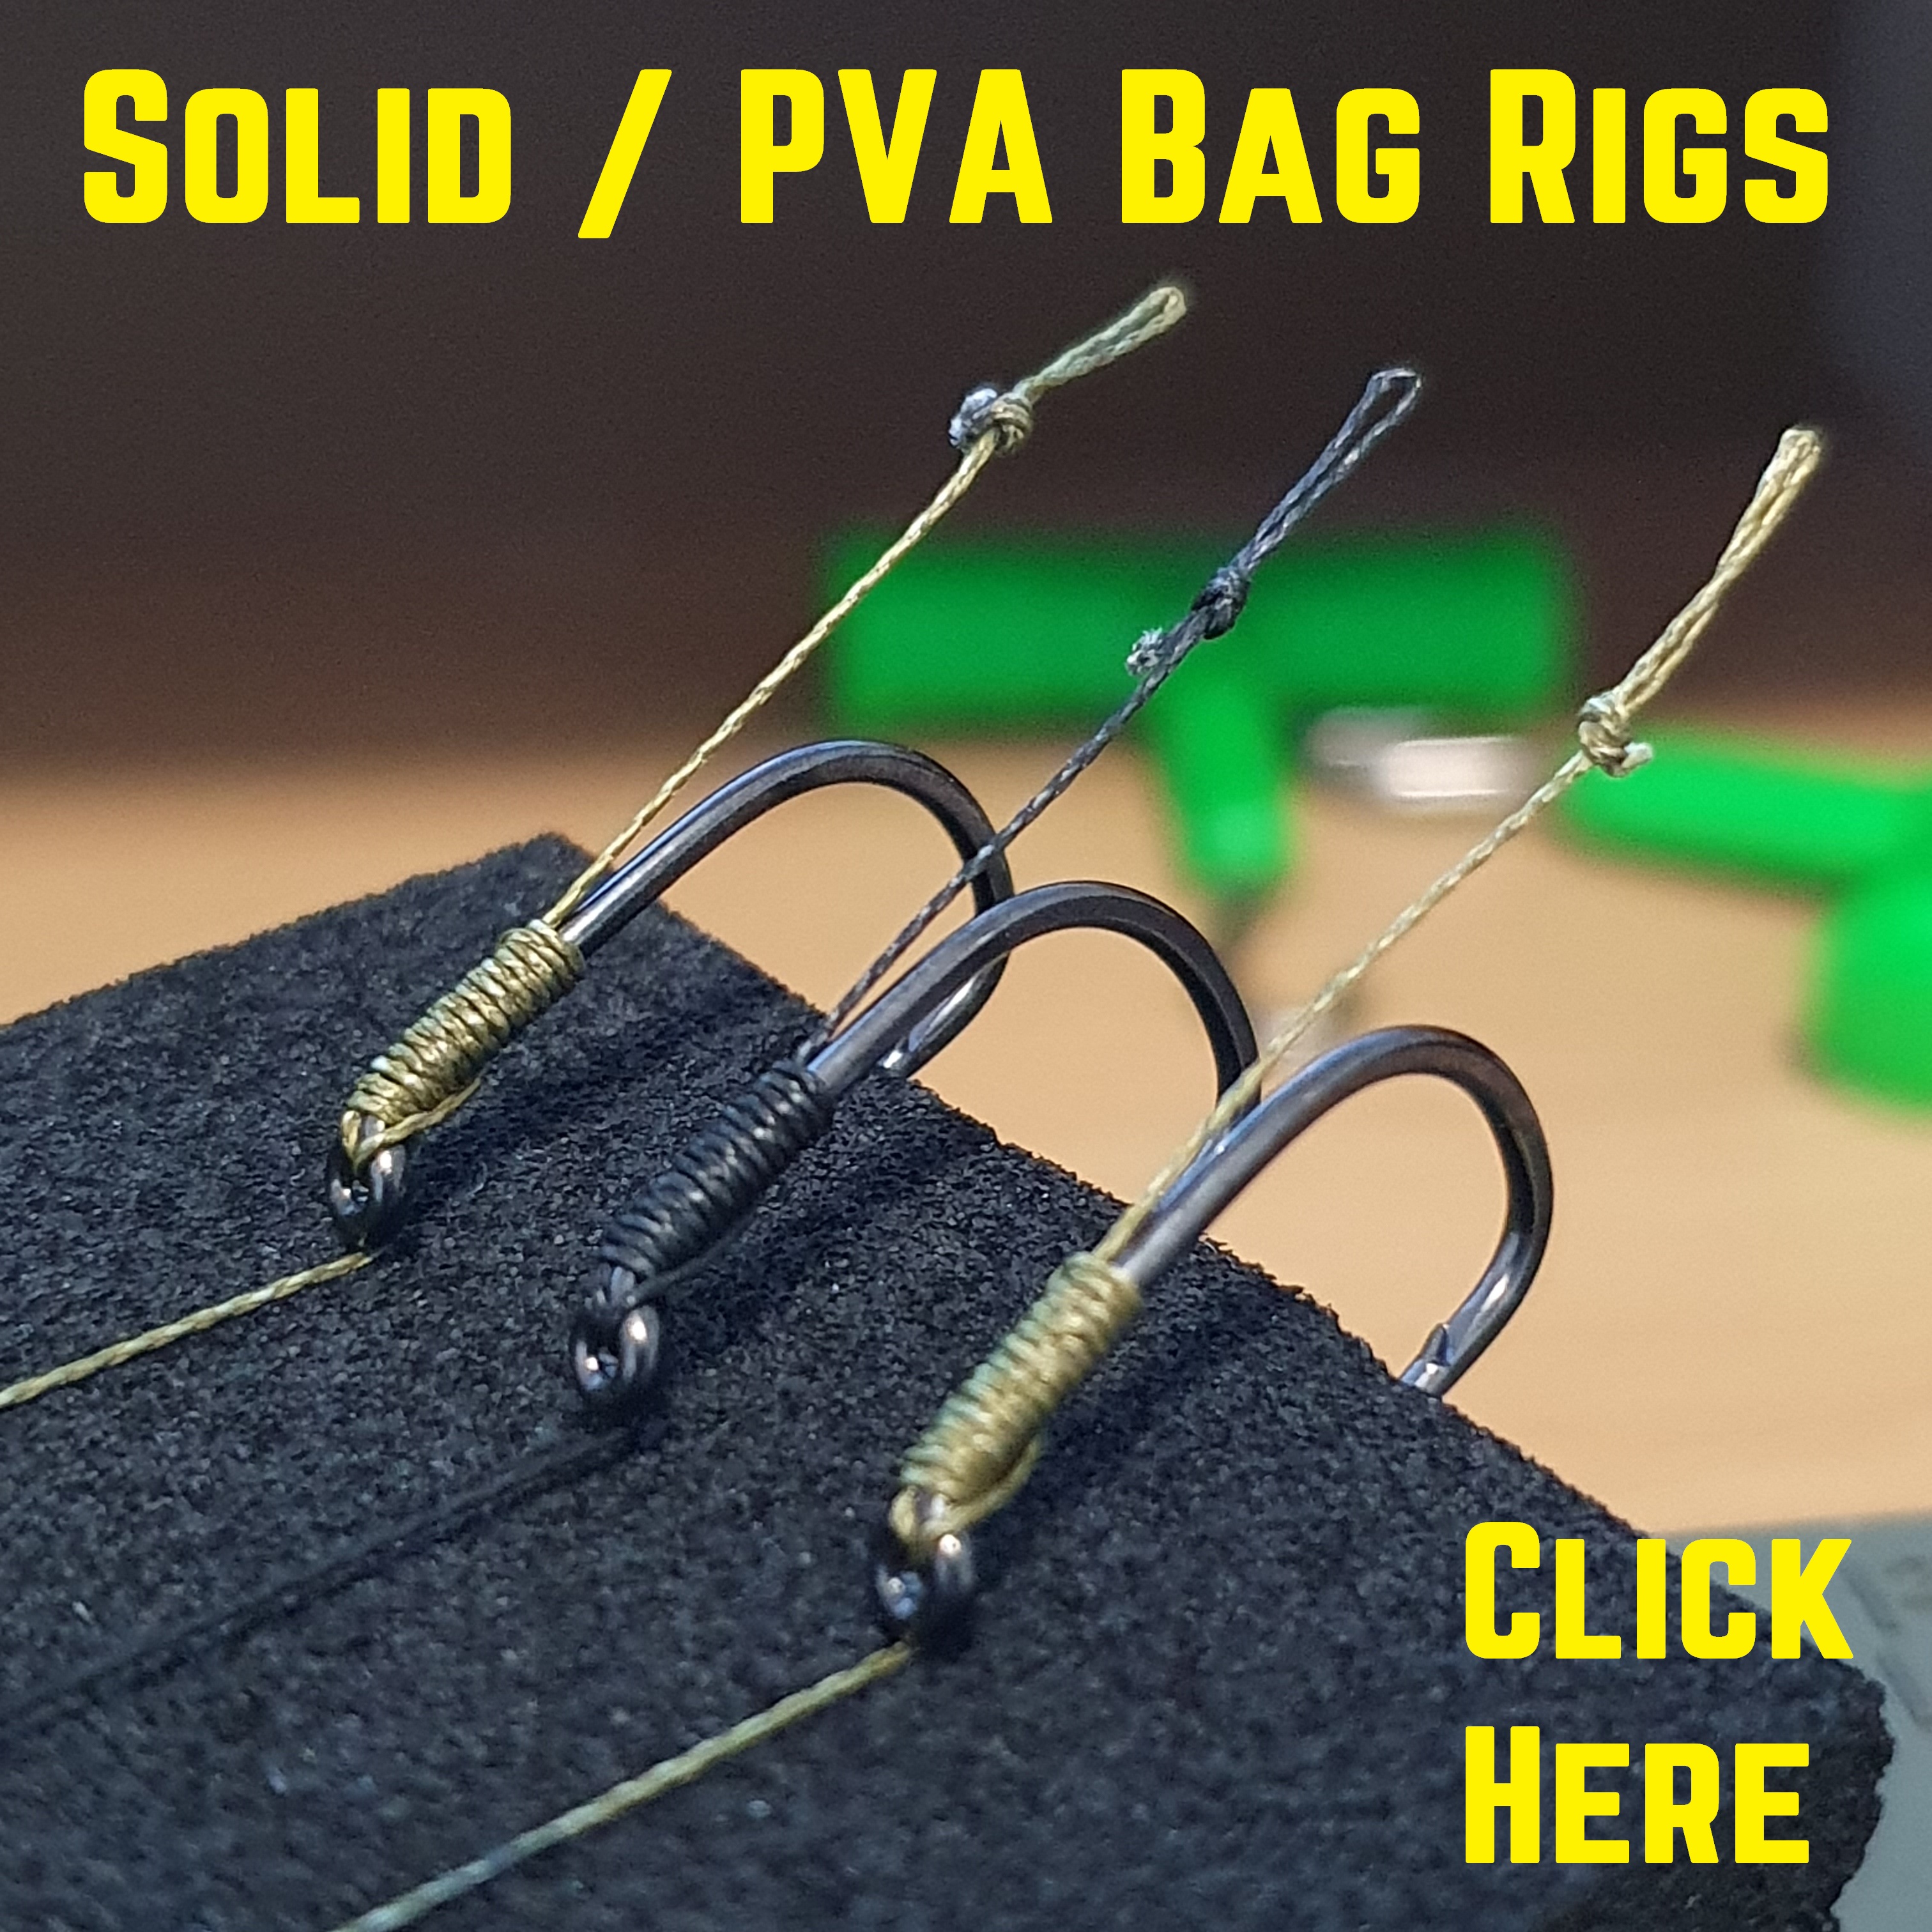 Please take a look at our other Solid / PVA Bag Rig listings